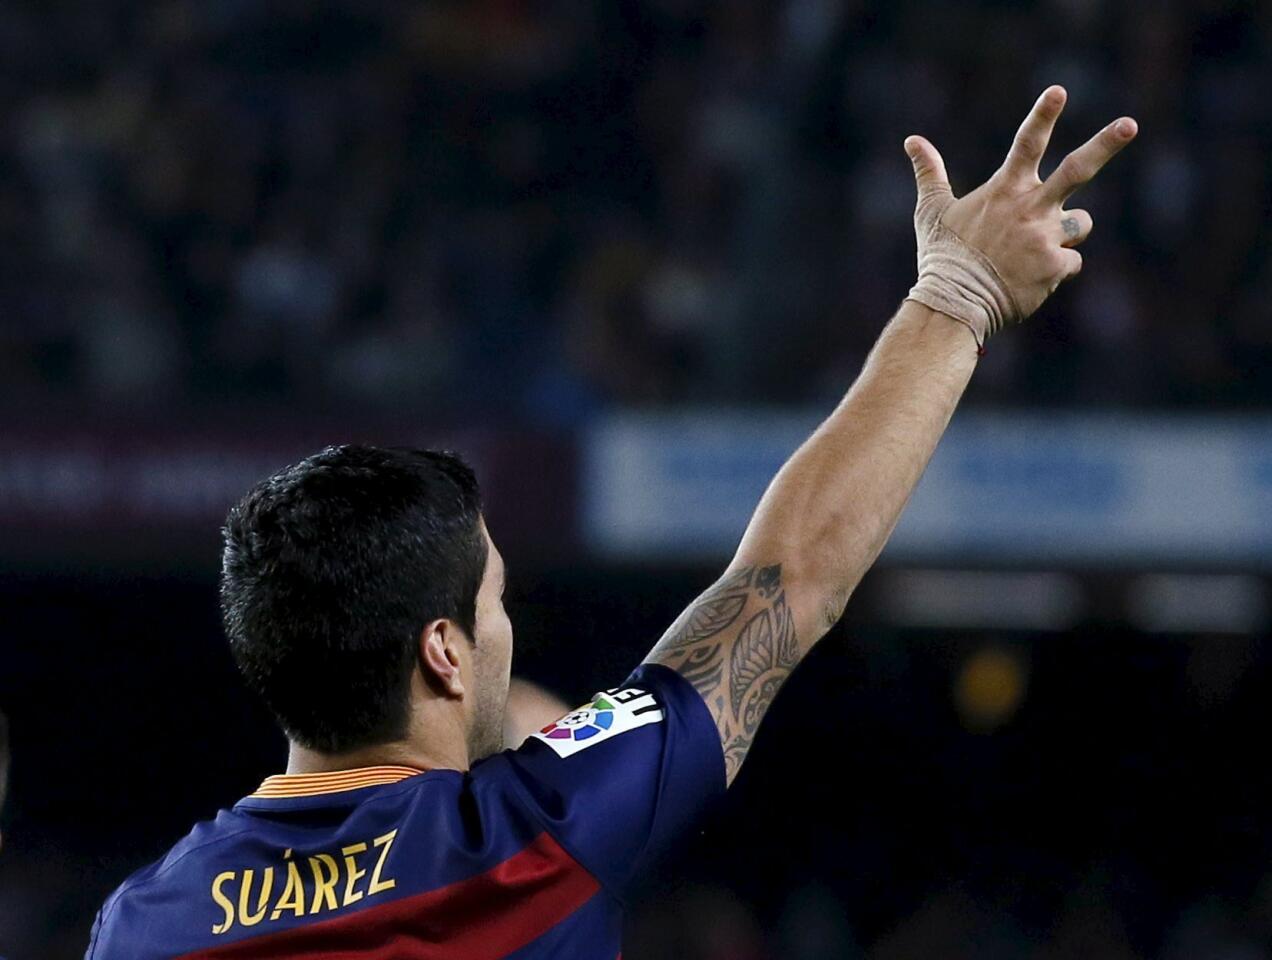 Barcelona's Luis Suarez celebrates a goal against Eibar during their Spanish first division soccer match at Camp Nou stadium in Barcelona